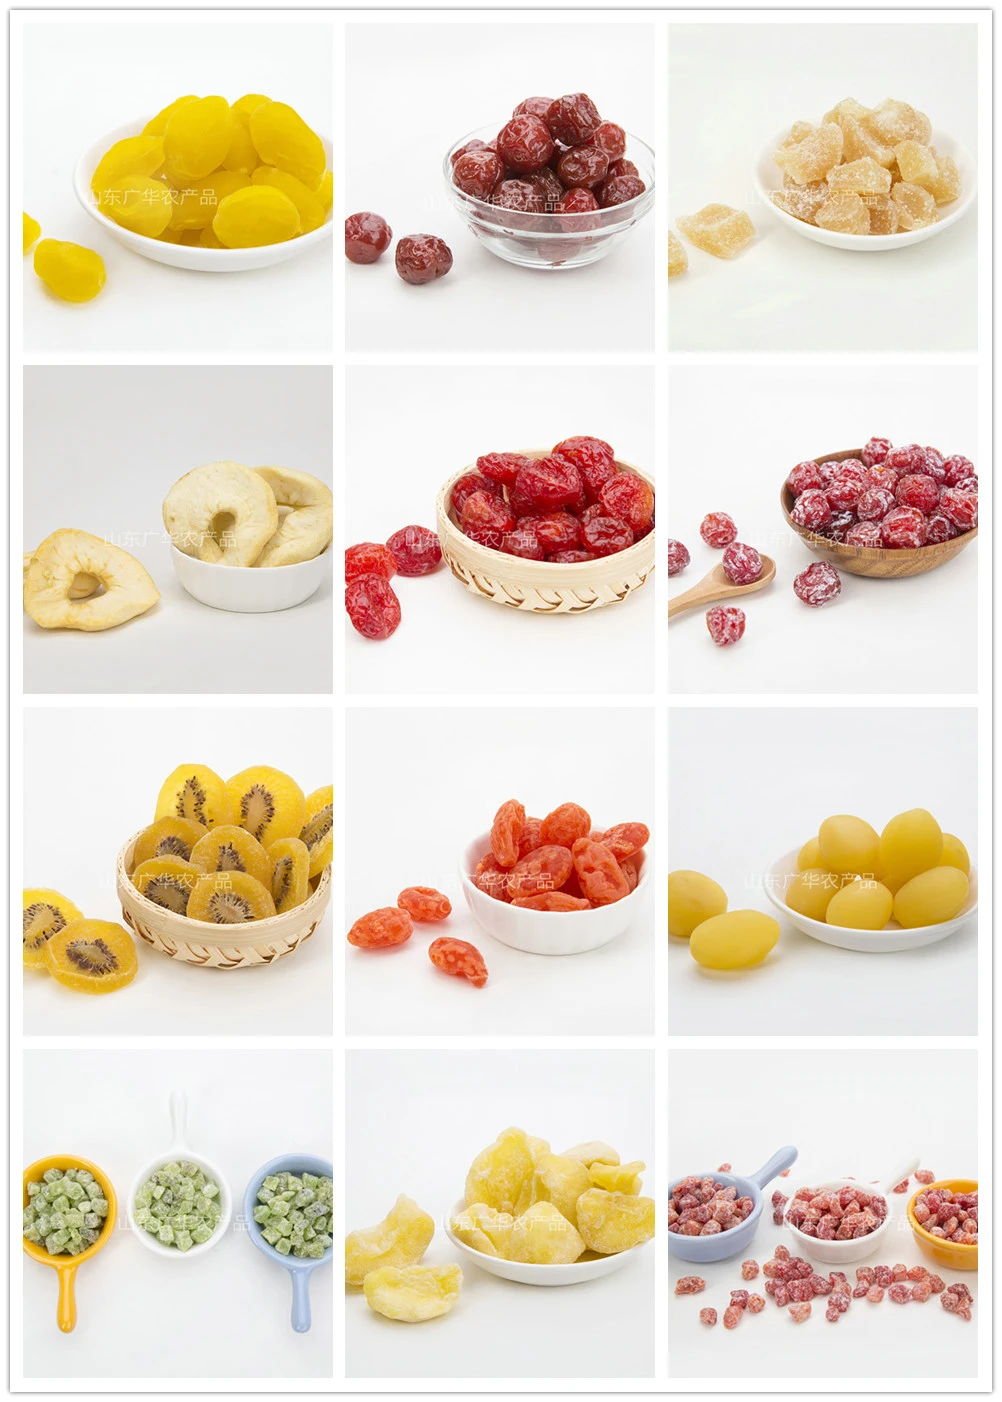 Hot Sale Different Type Dried Fruits From China